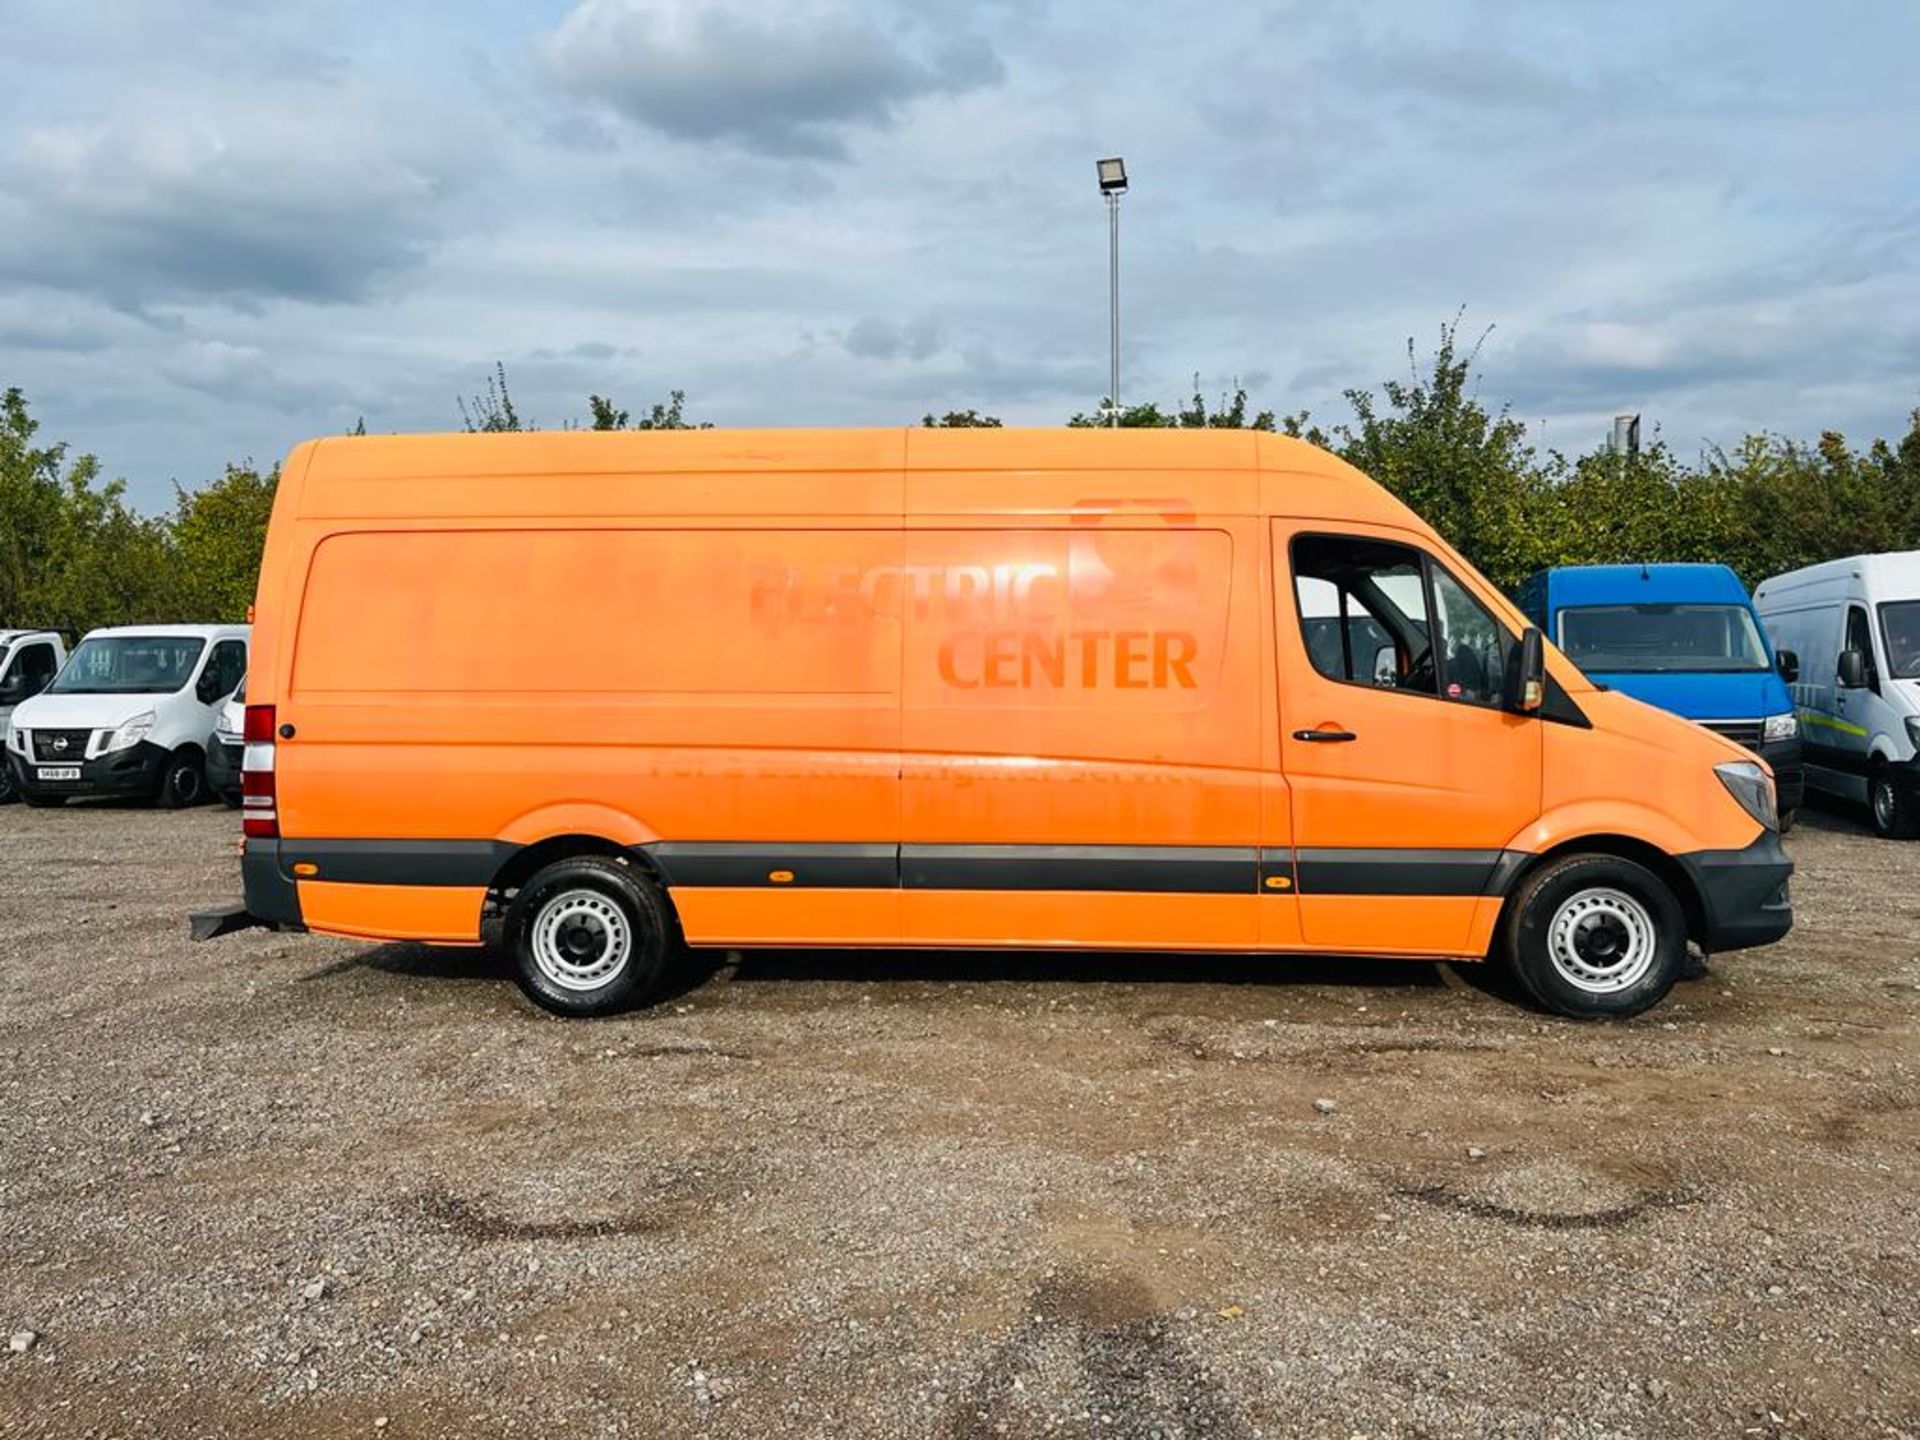 Mercedes Benz Sprinter 2.1 313 CDI 2015 '15 Reg' L3 H3 - Panel Van - One Owner from new - Image 14 of 28